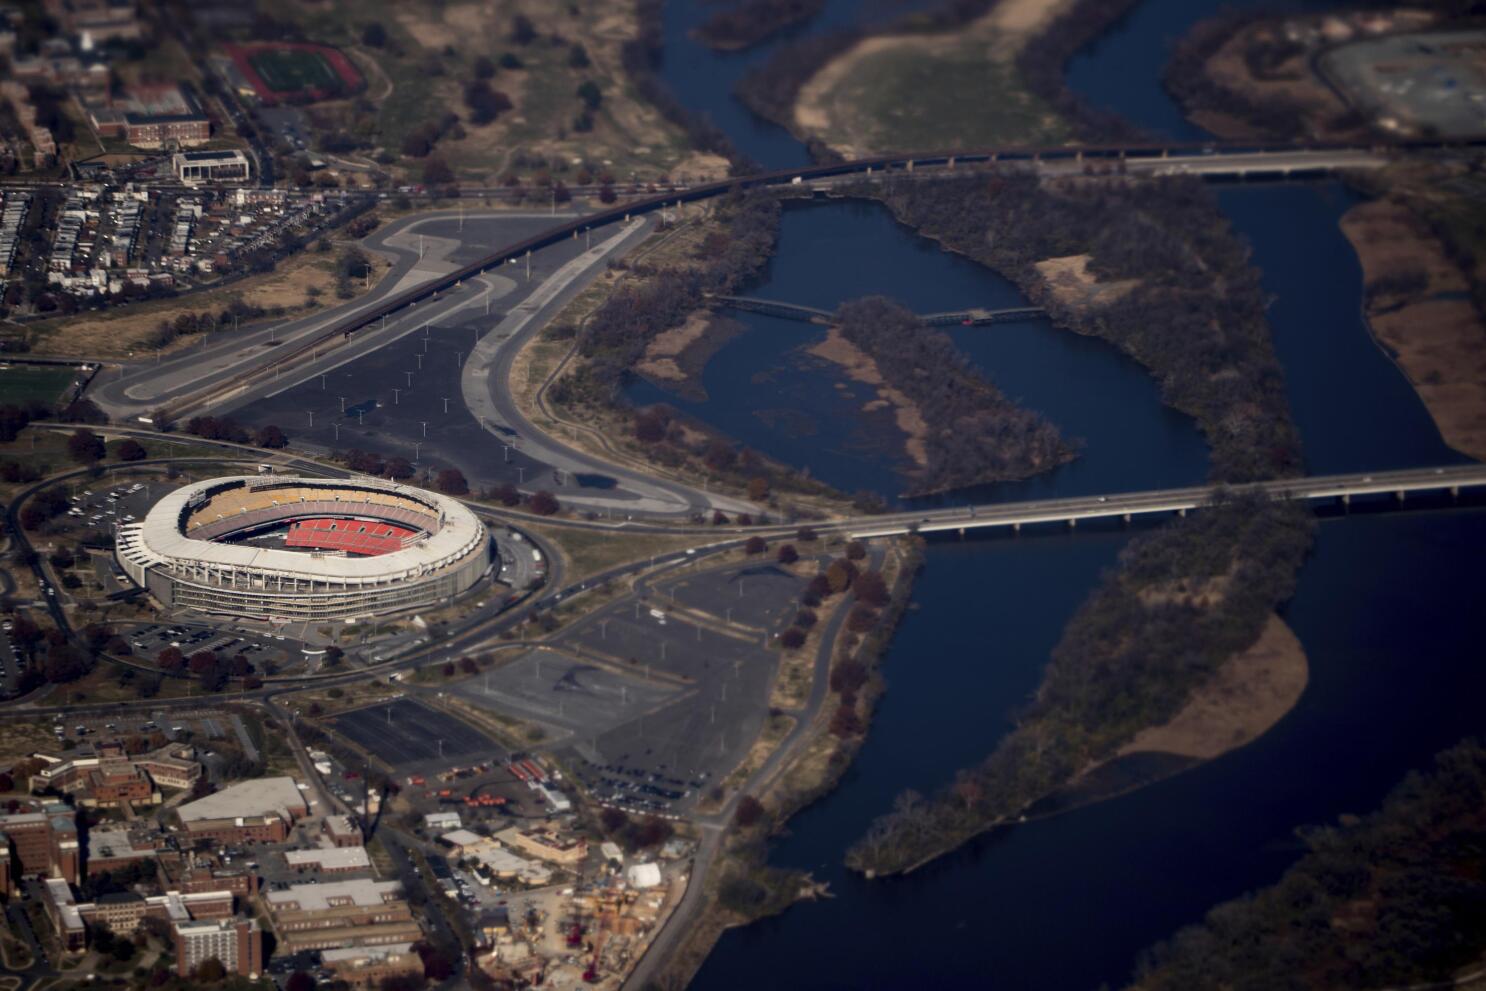 Commanders supporting DC efforts to control RFK Stadium site | AP News